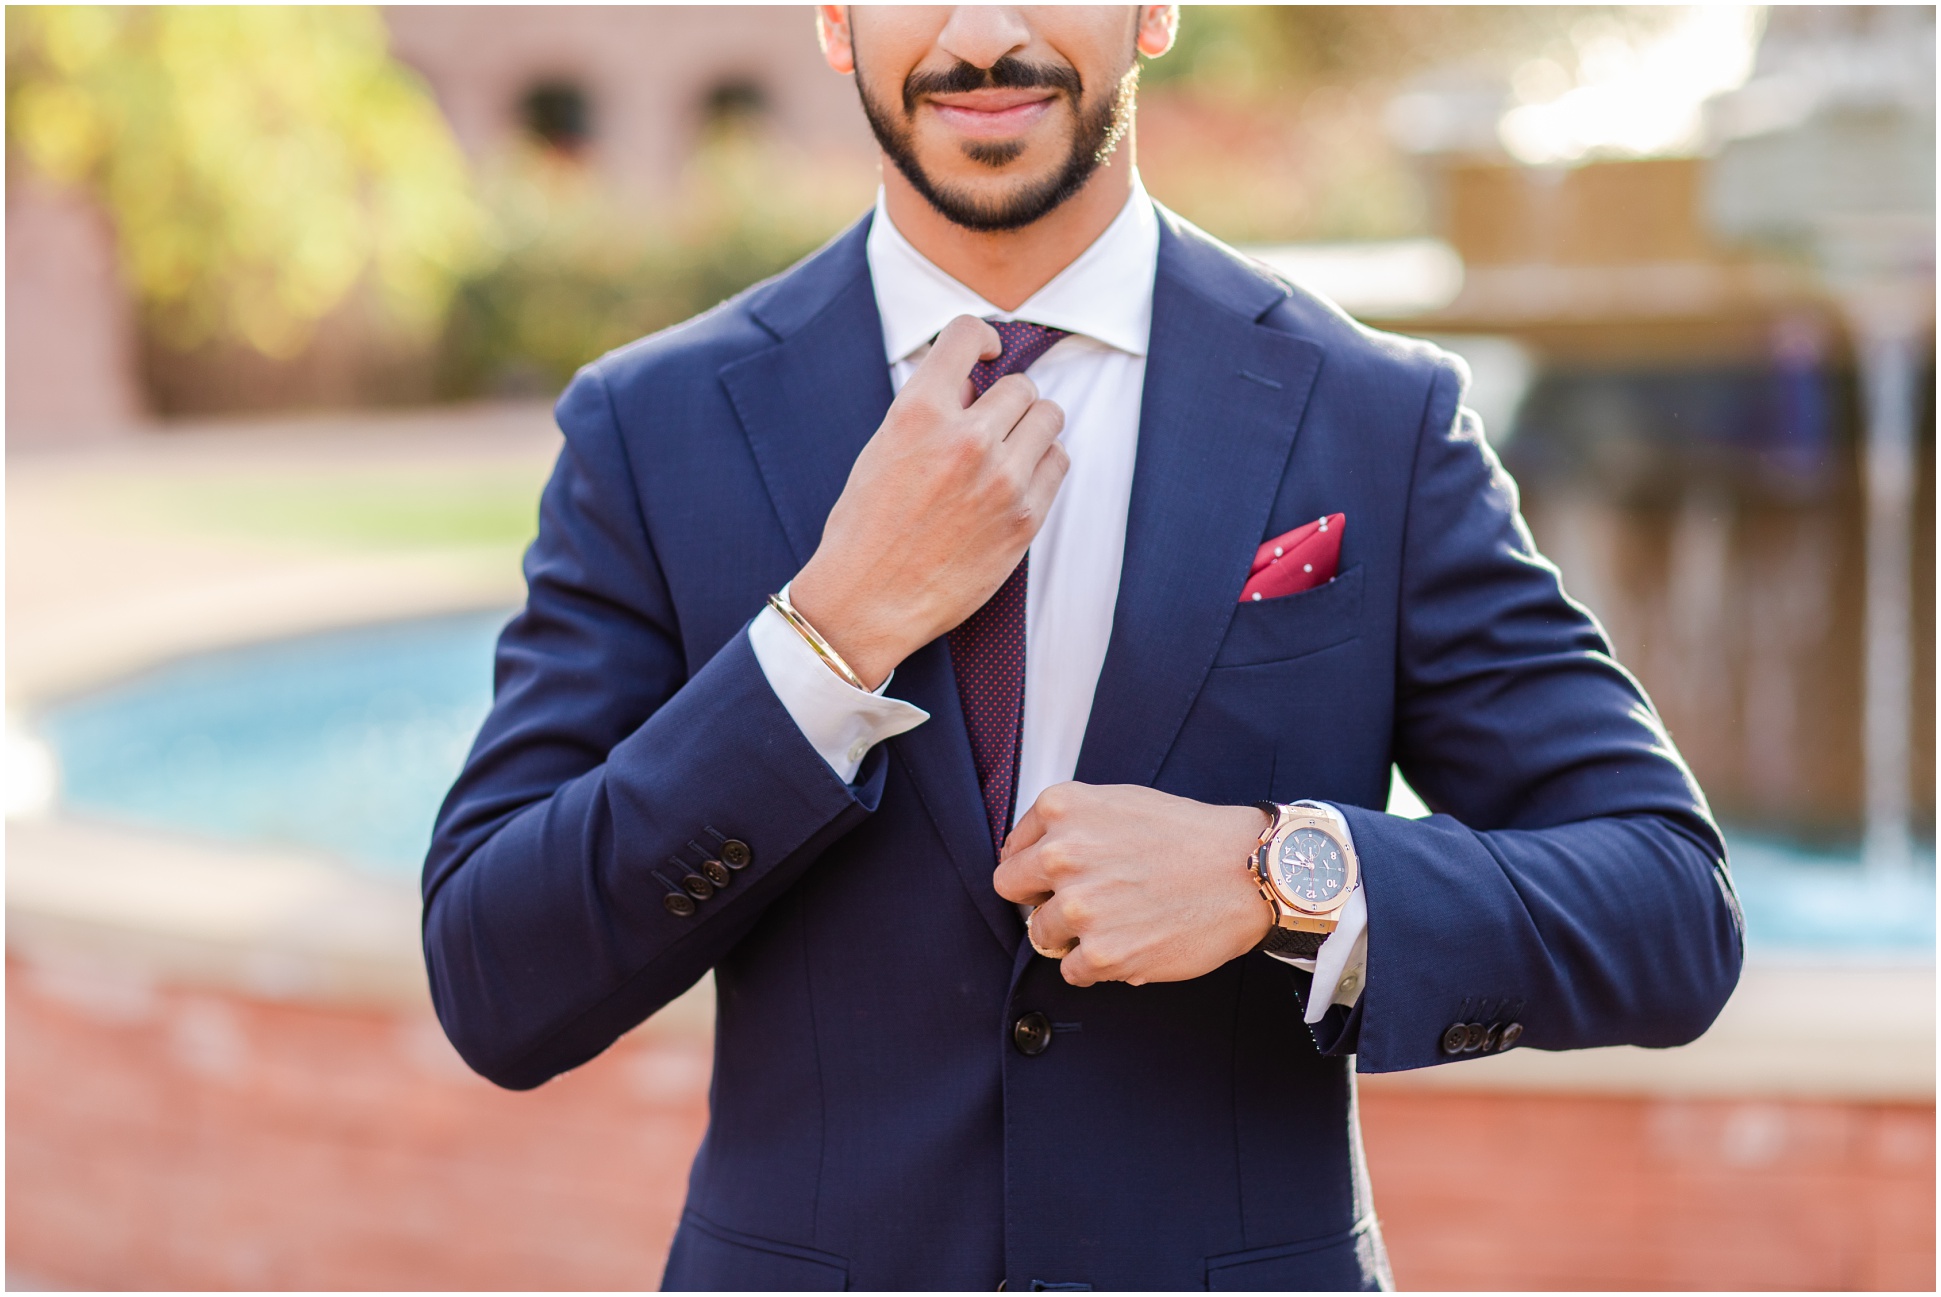 Young adult wearing navy blue suit with gold watch and fixing maroon tie